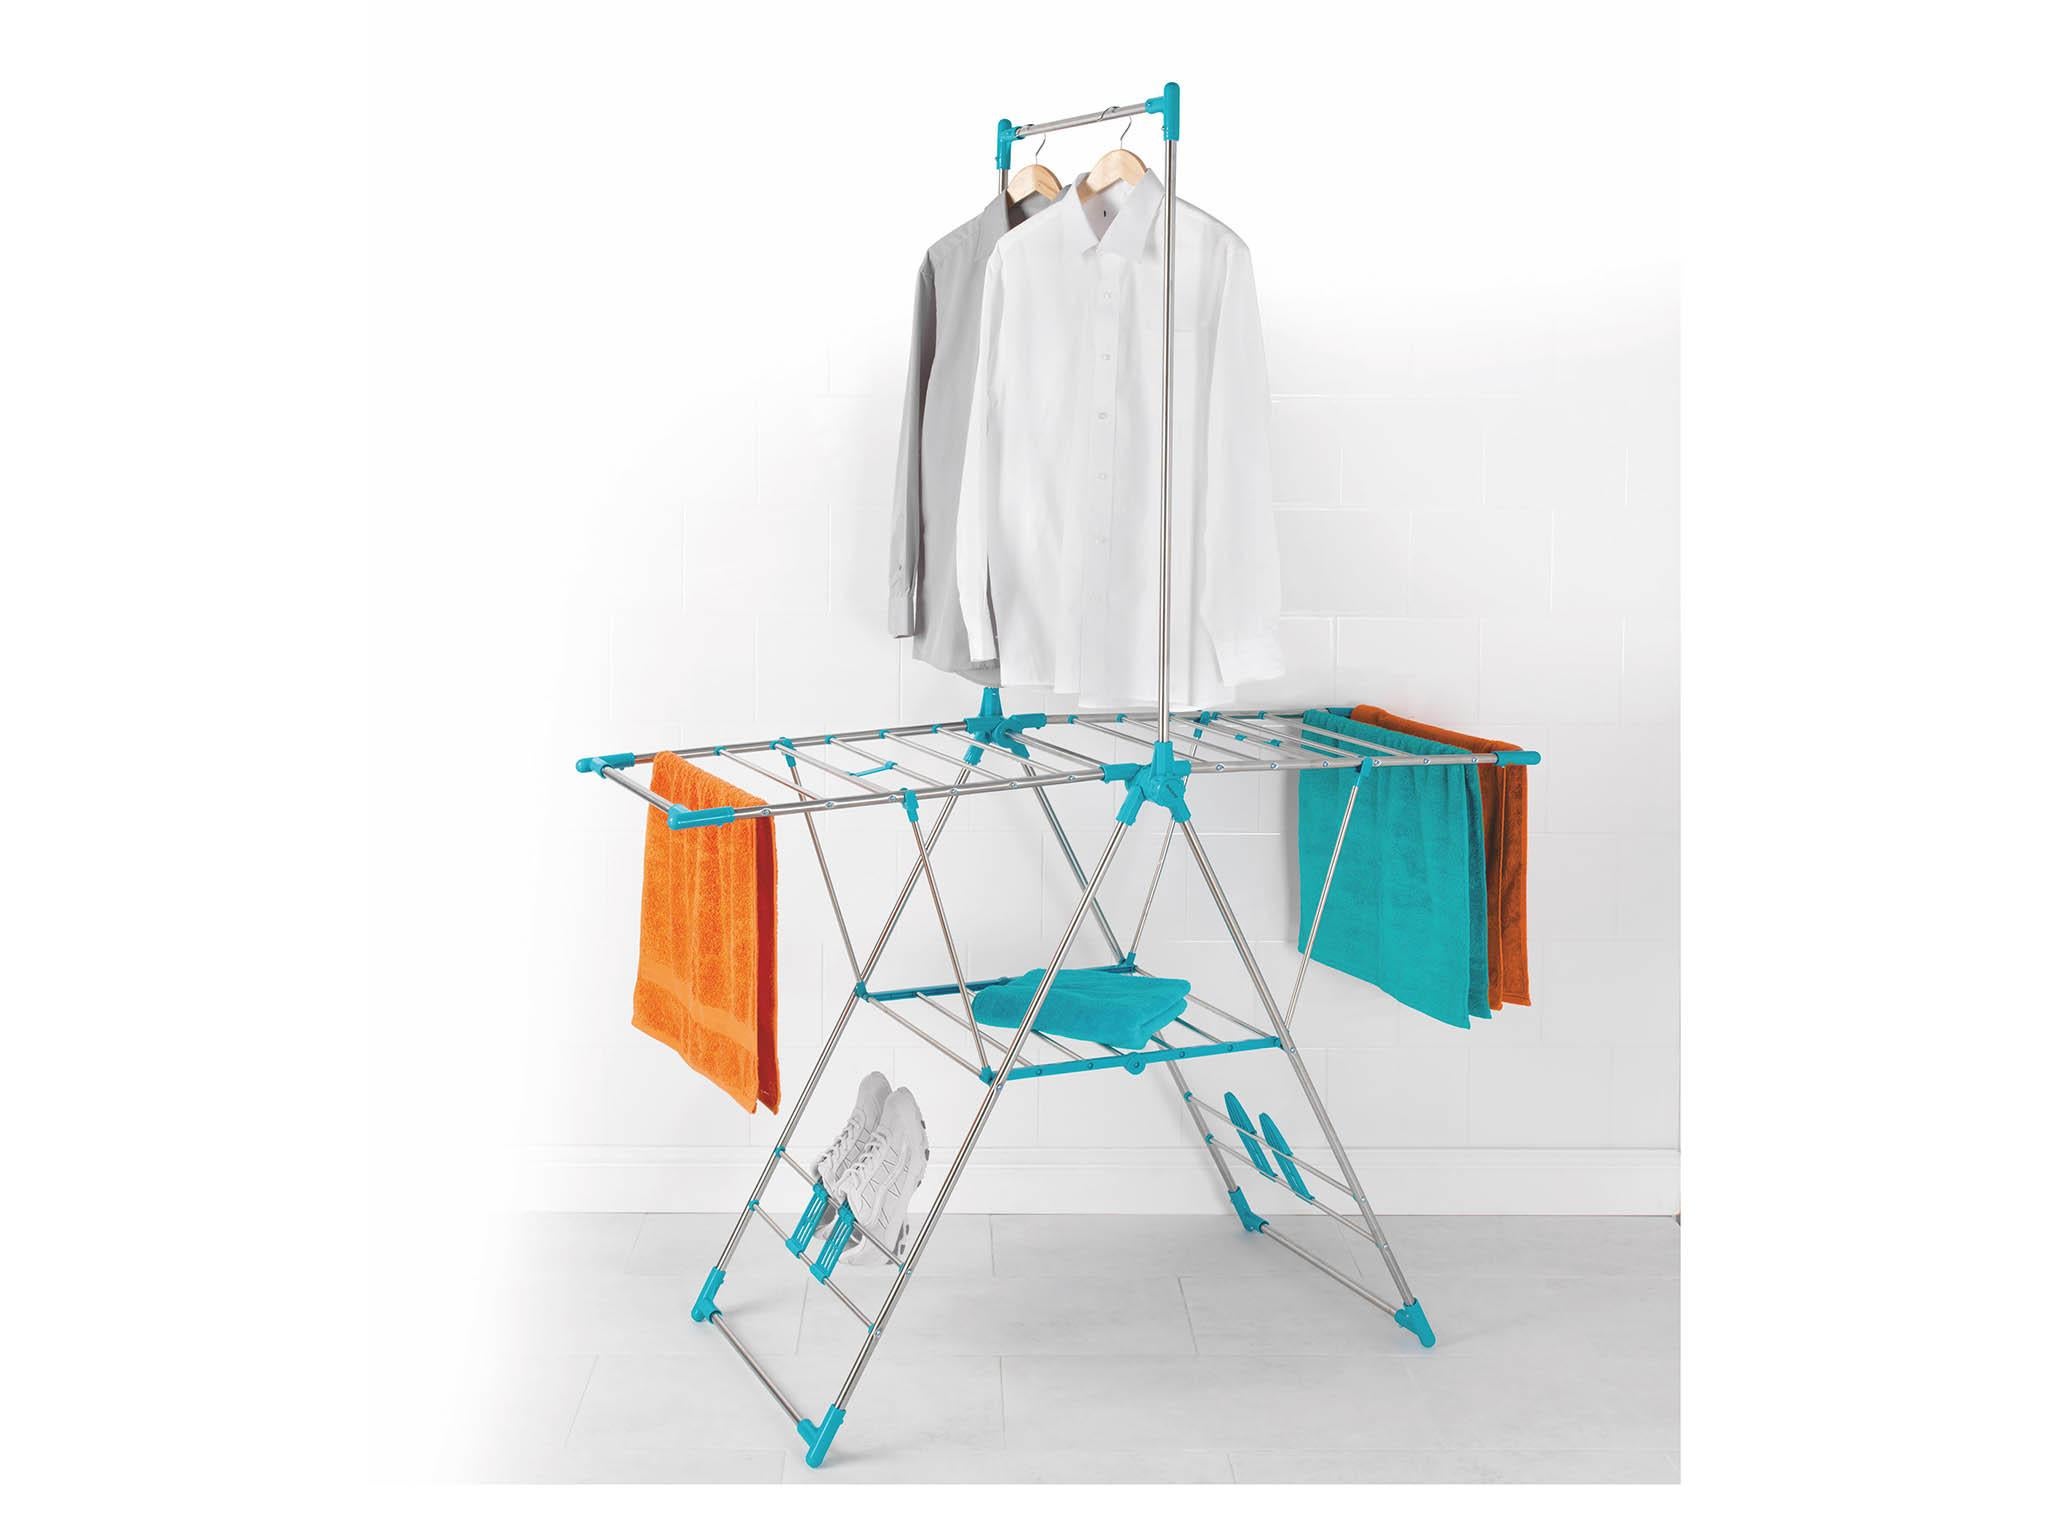 Best Clothes Airers And Drying Racks That Make Drying Washing Easier